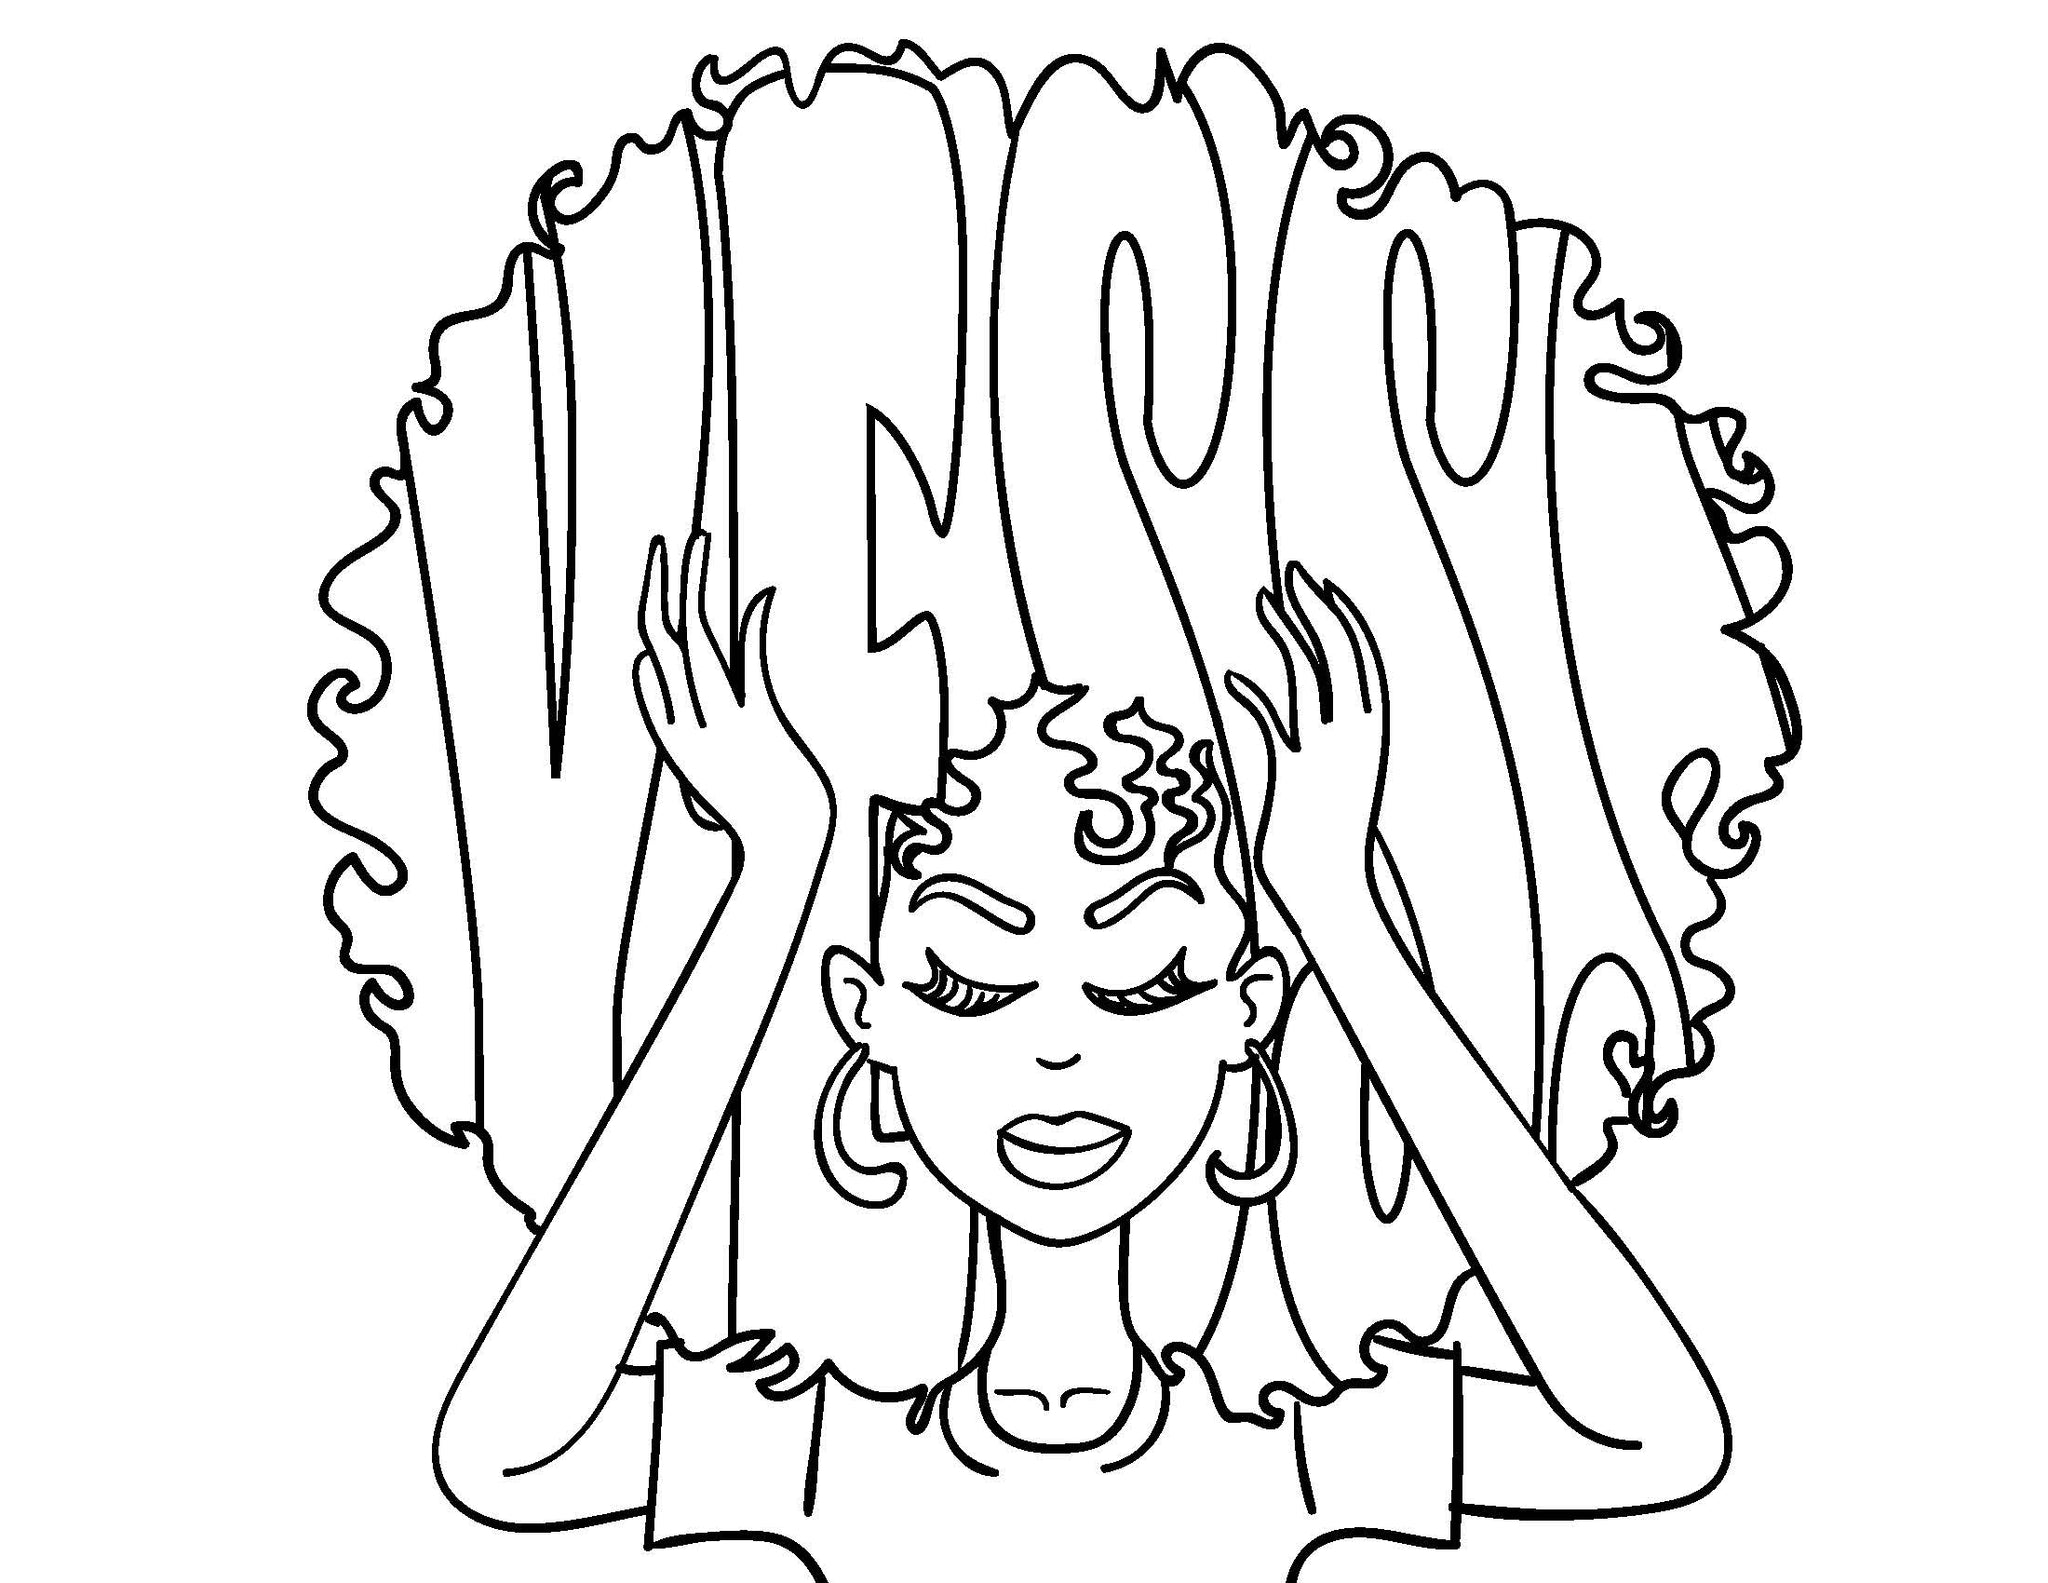 YESSS Fro Coloring Page